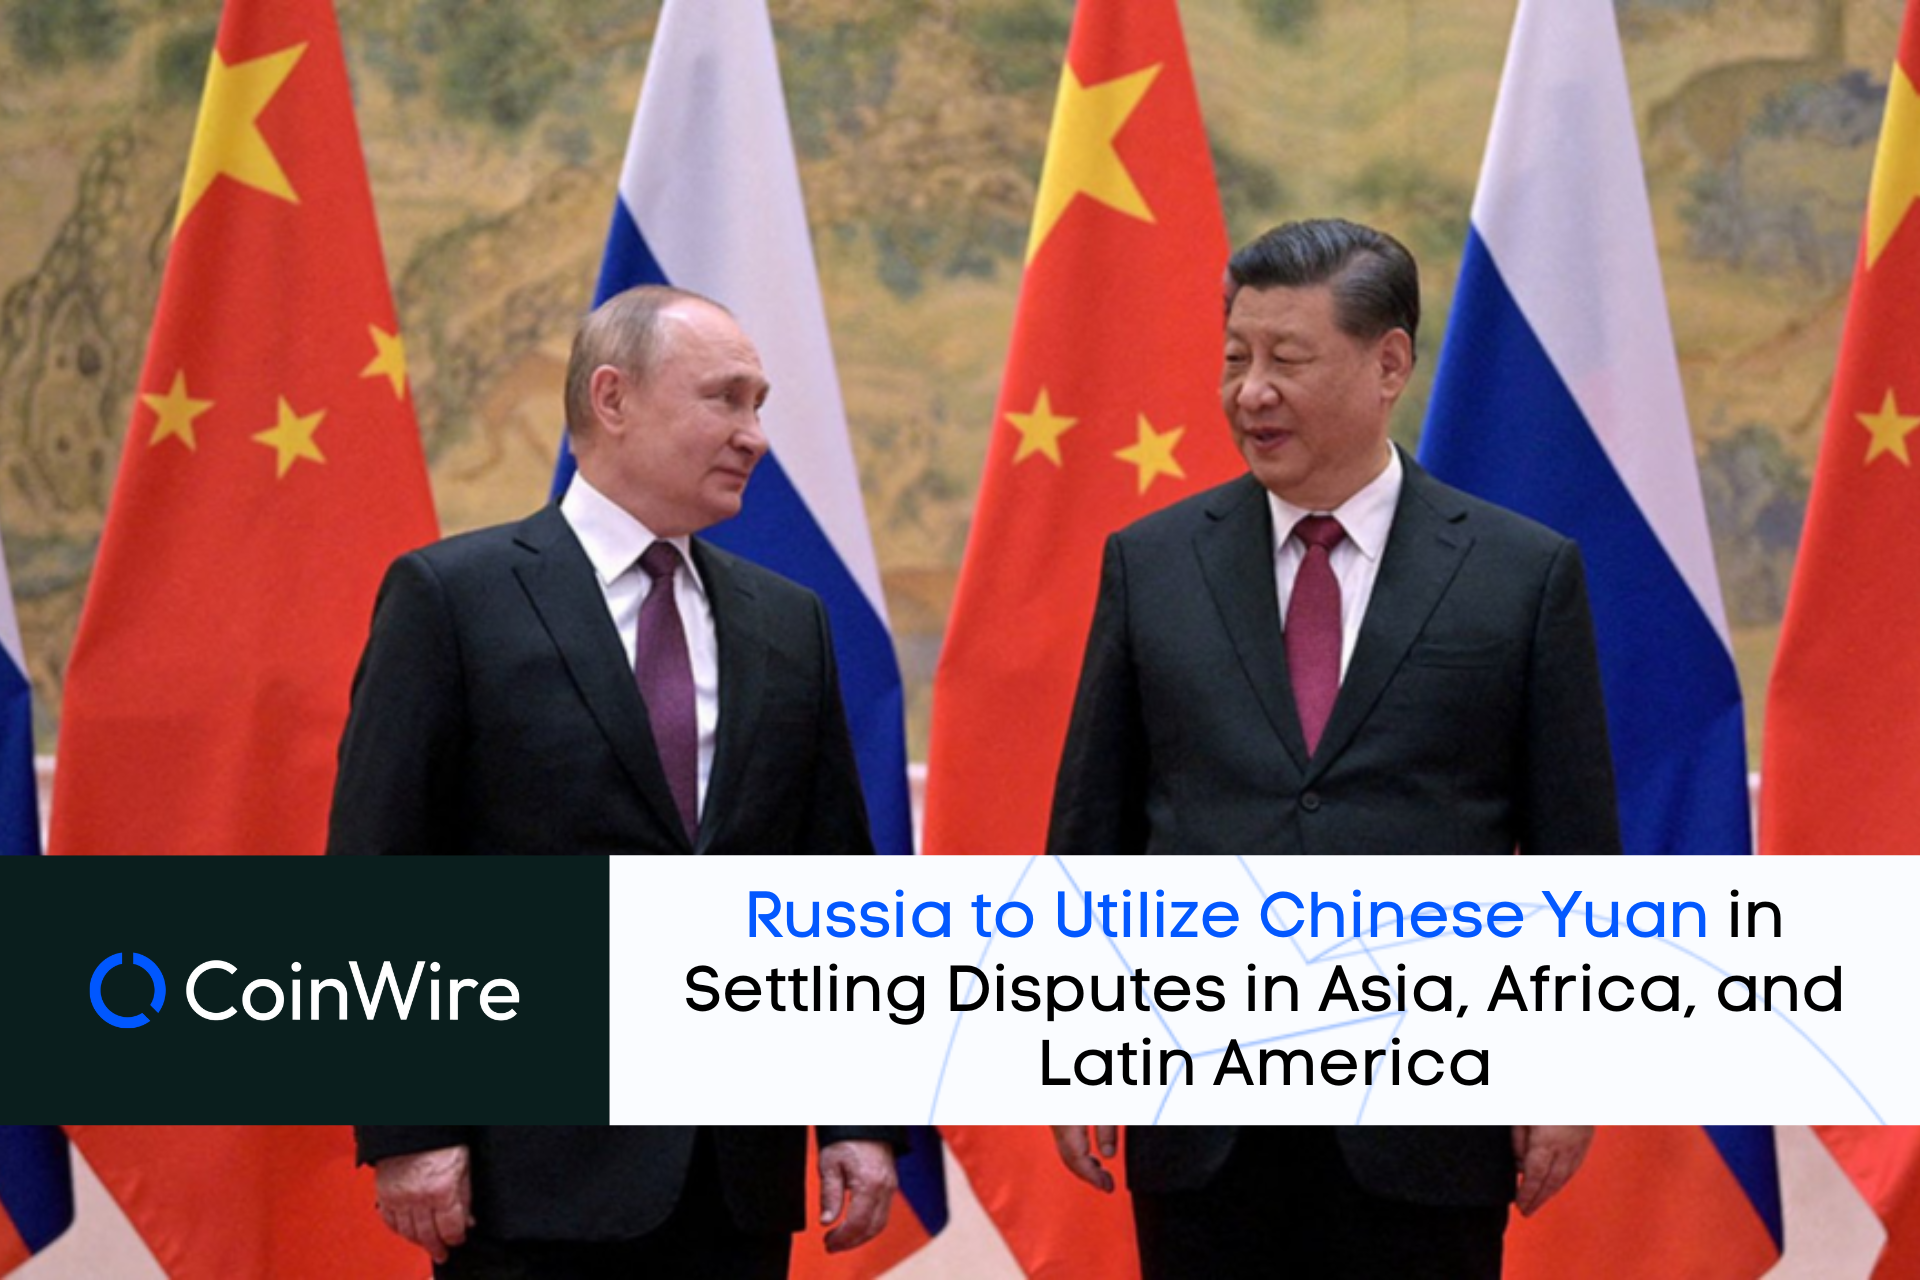 Russia To Utilize Chinese Yuan In Settling Disputes In Asia, Africa, And Latin America